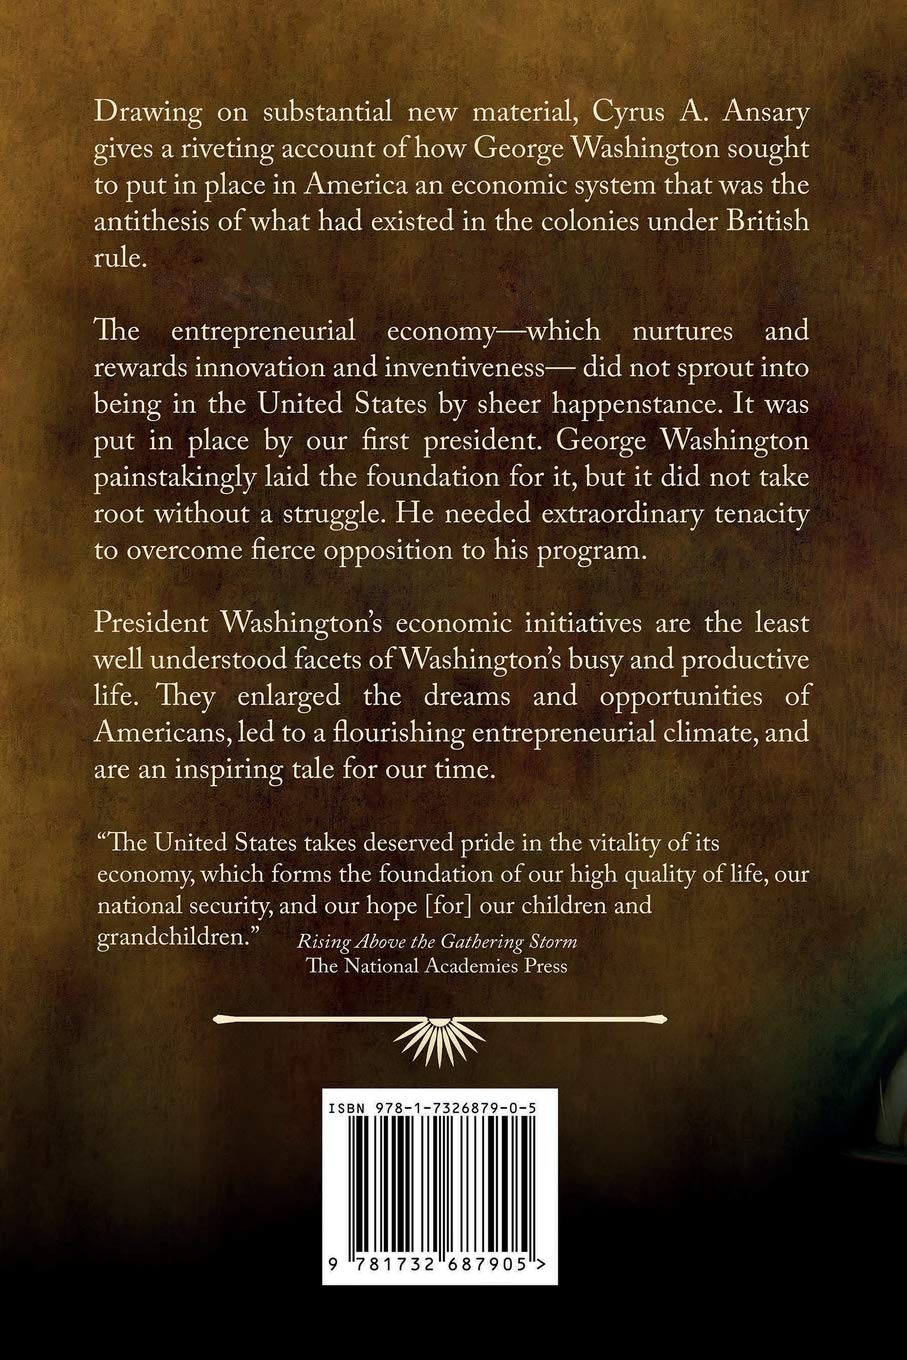 George Washington Dealmaker-In-Chief: The Story of How The Father of Our Country Unleashed The Entrepreneurial Spirit in America